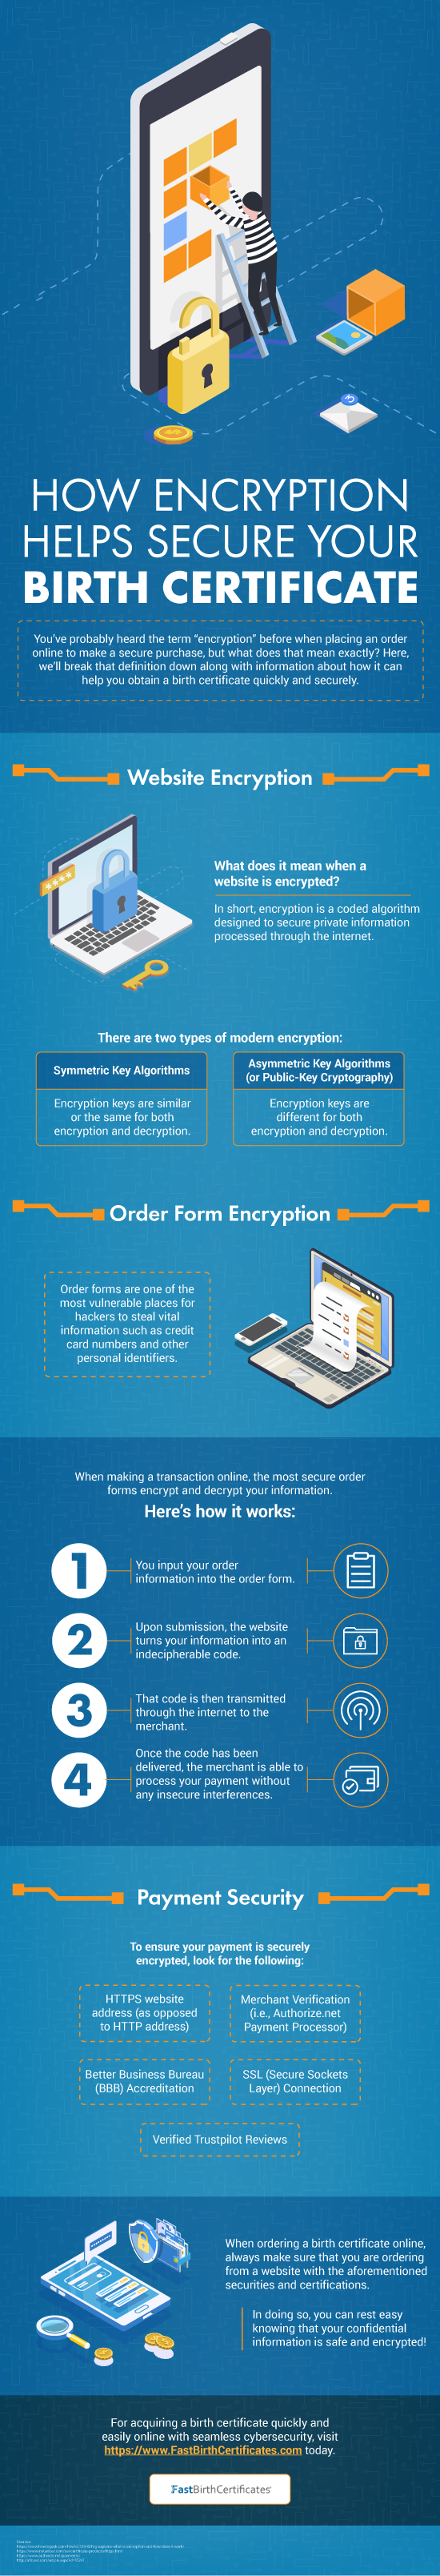 How Encryption Helps Secure Your Birth Certificate (Infographic)